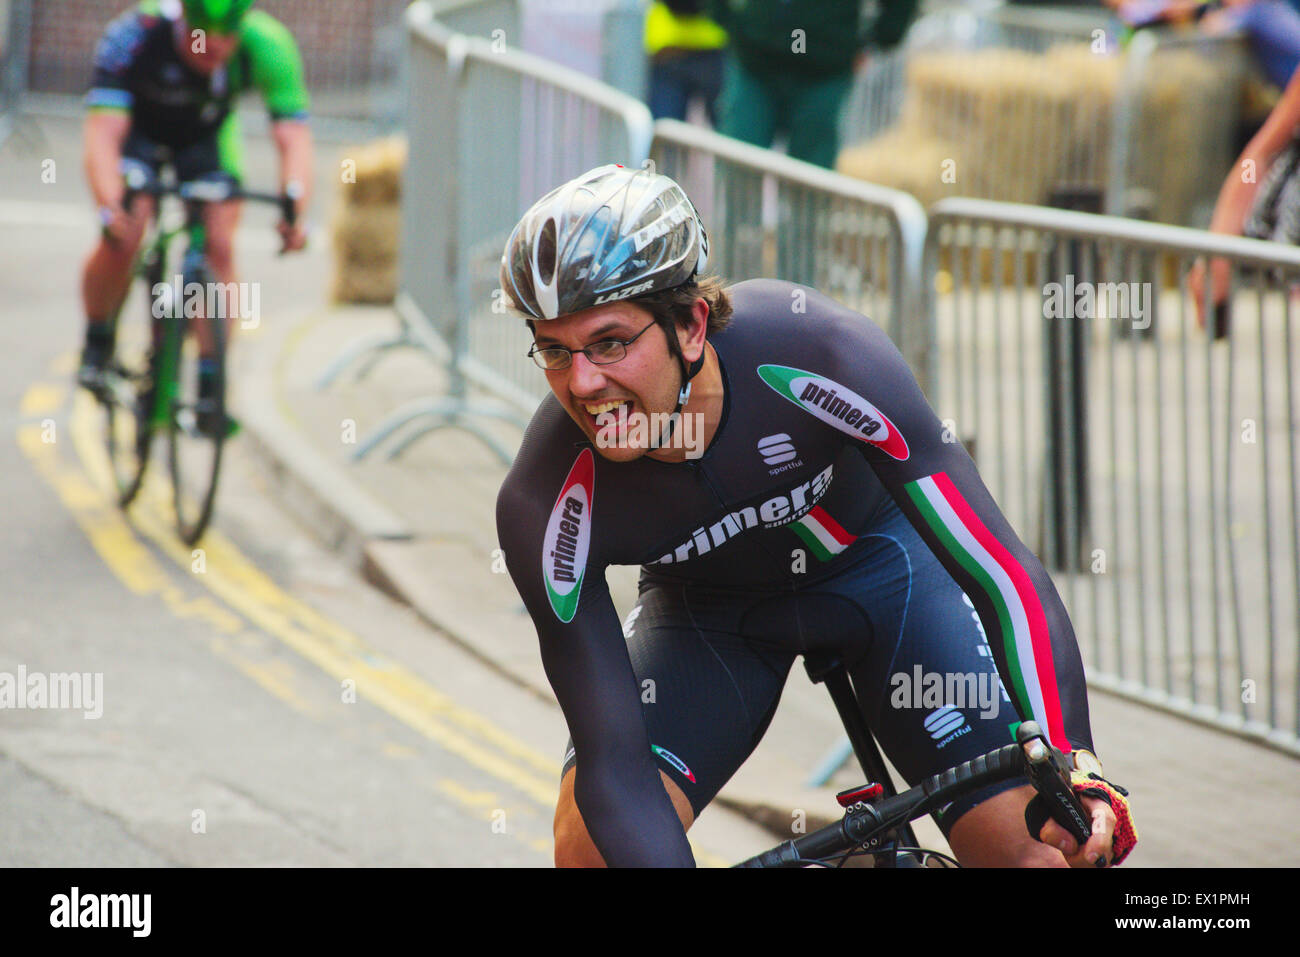 Cycle road race. Cyclist in the Bristol Grand Prix cycle race men's elite, UK Stock Photo